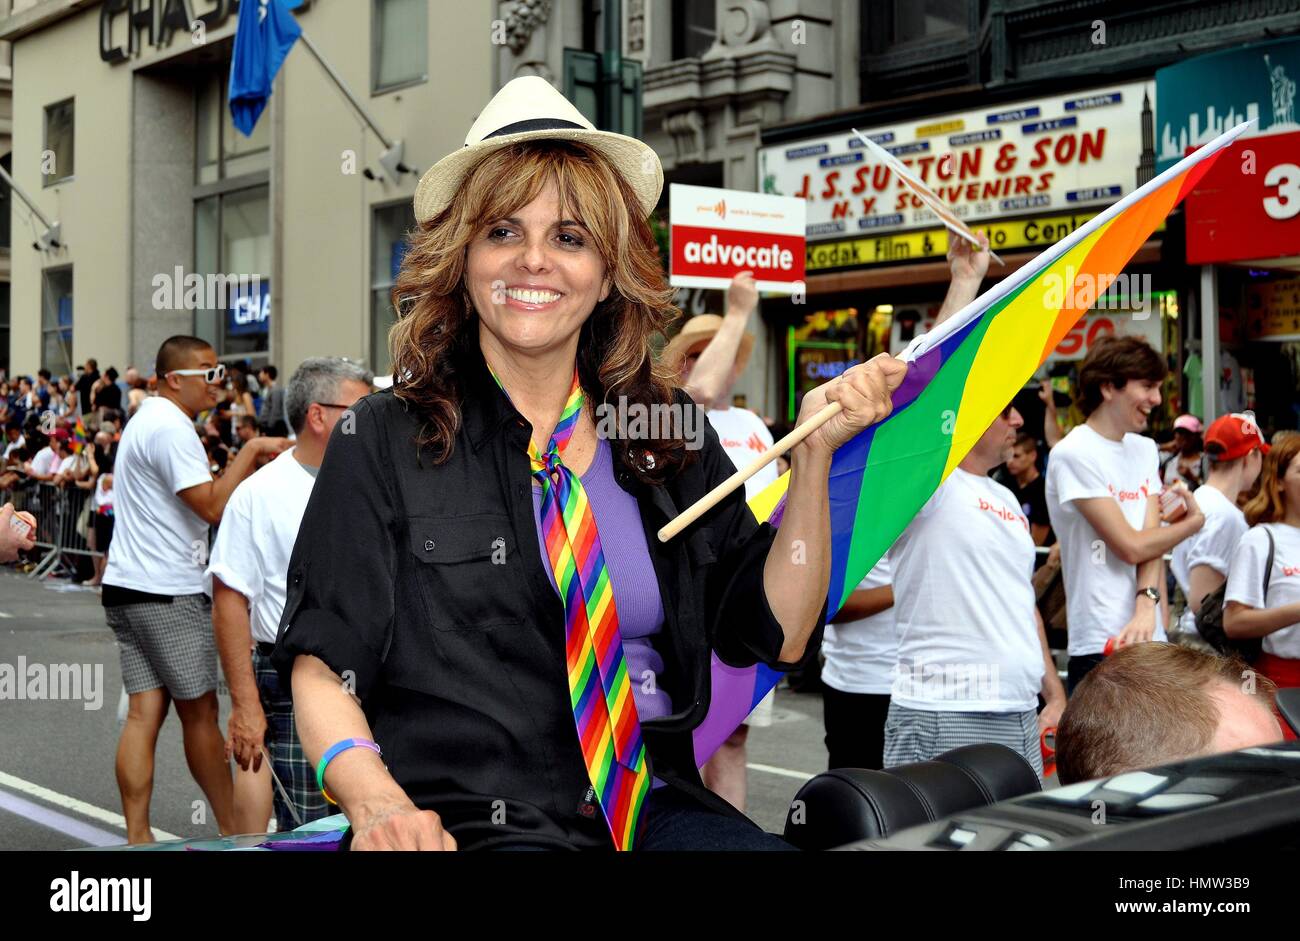 New York City - June 25, 2011:   CNN-TV commentator Jane Velez-Mitchell riding in the GLAAD car at the 2011 Gay Pride Parade on Fifth Avenue Stock Photo